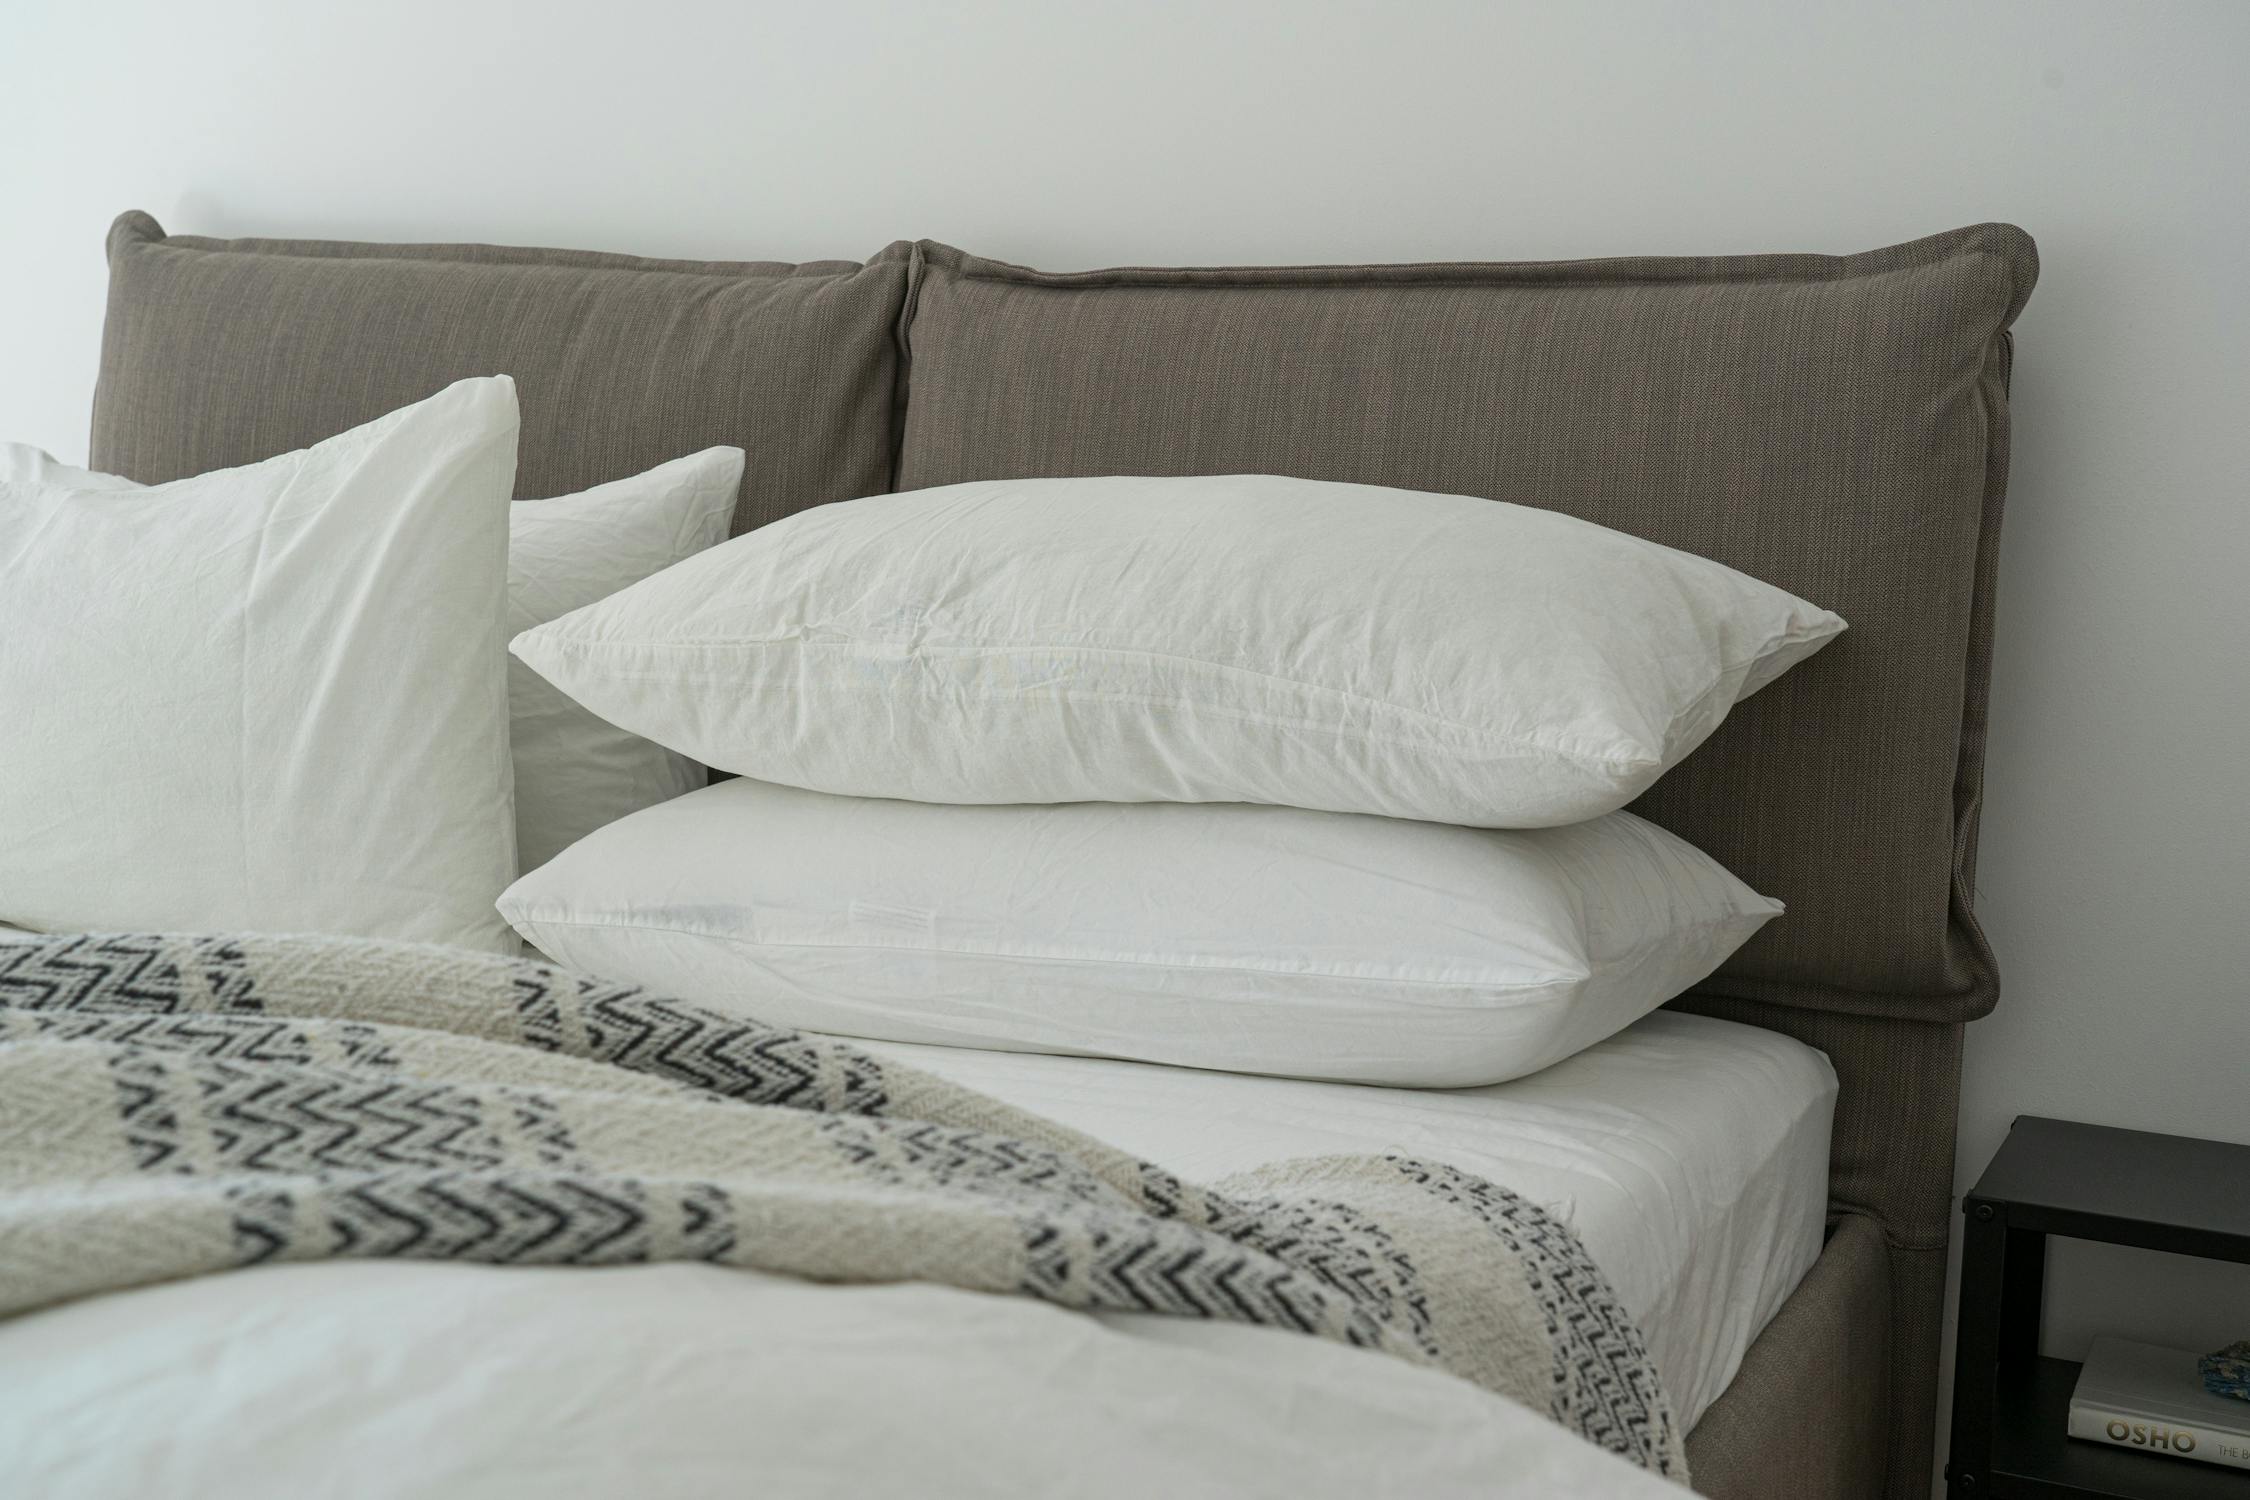 Image of bed sheets and pillows